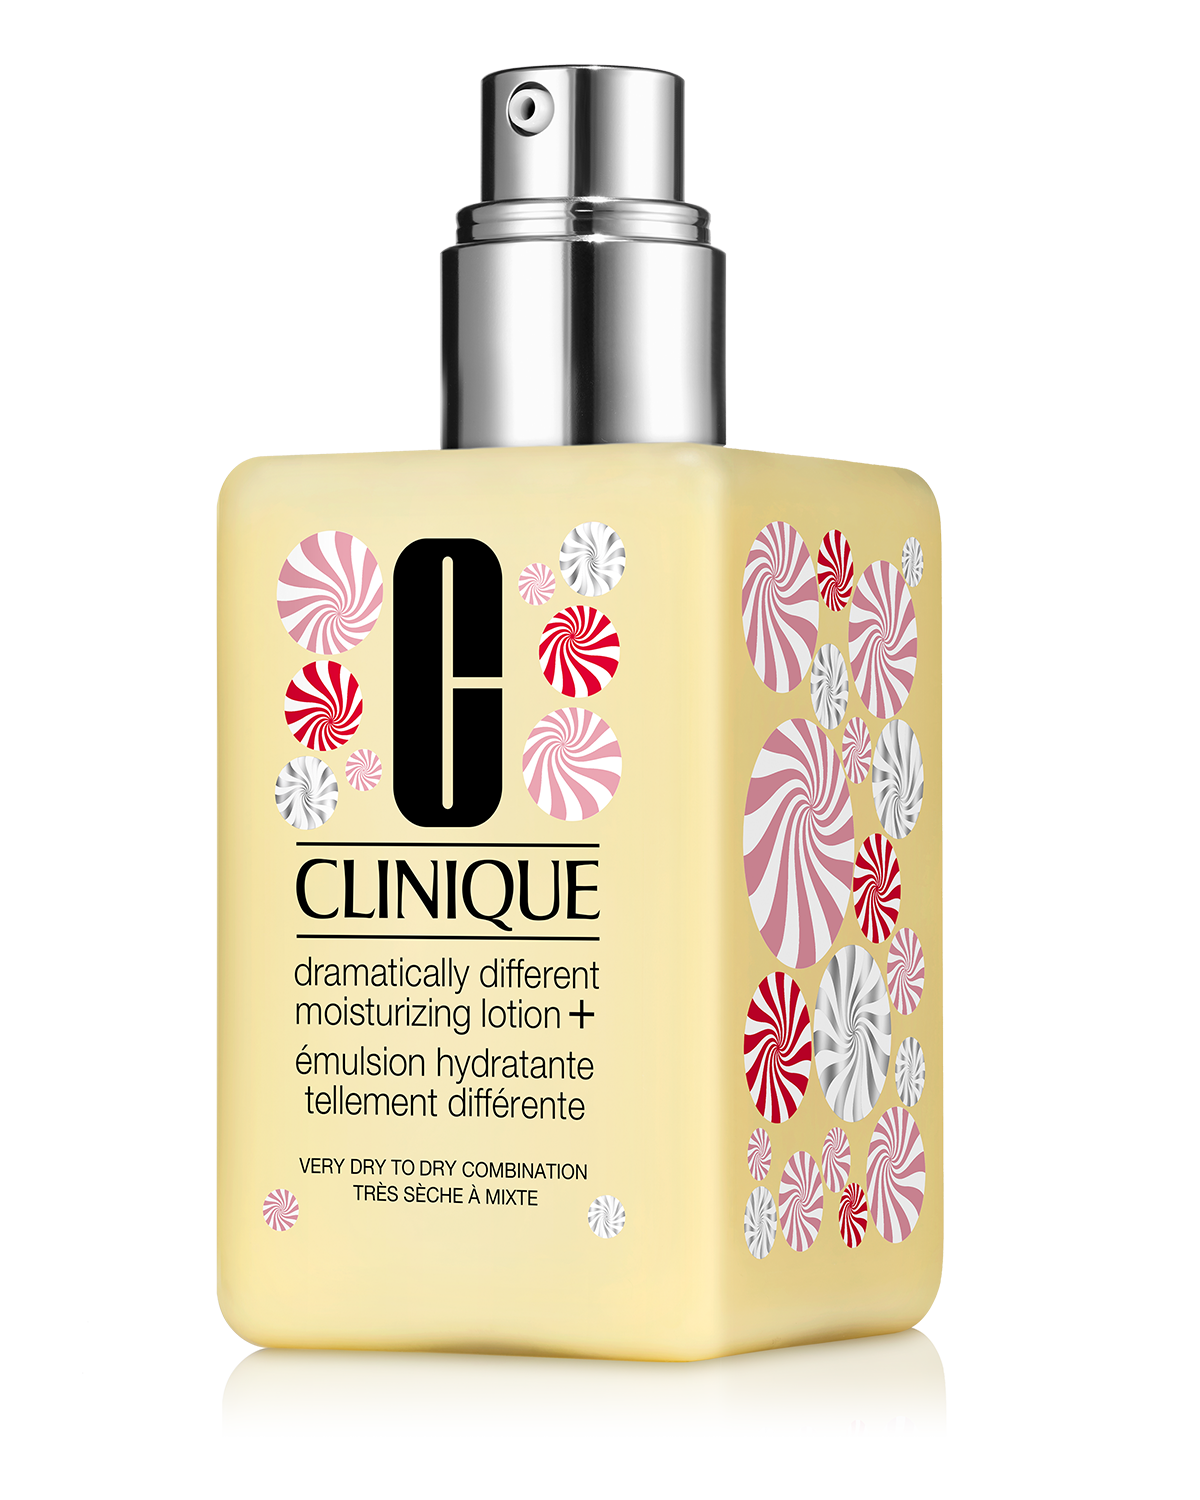 Lotion+ | Austria Dramatically Clinique Moisturizing Different Jumbo Decorated